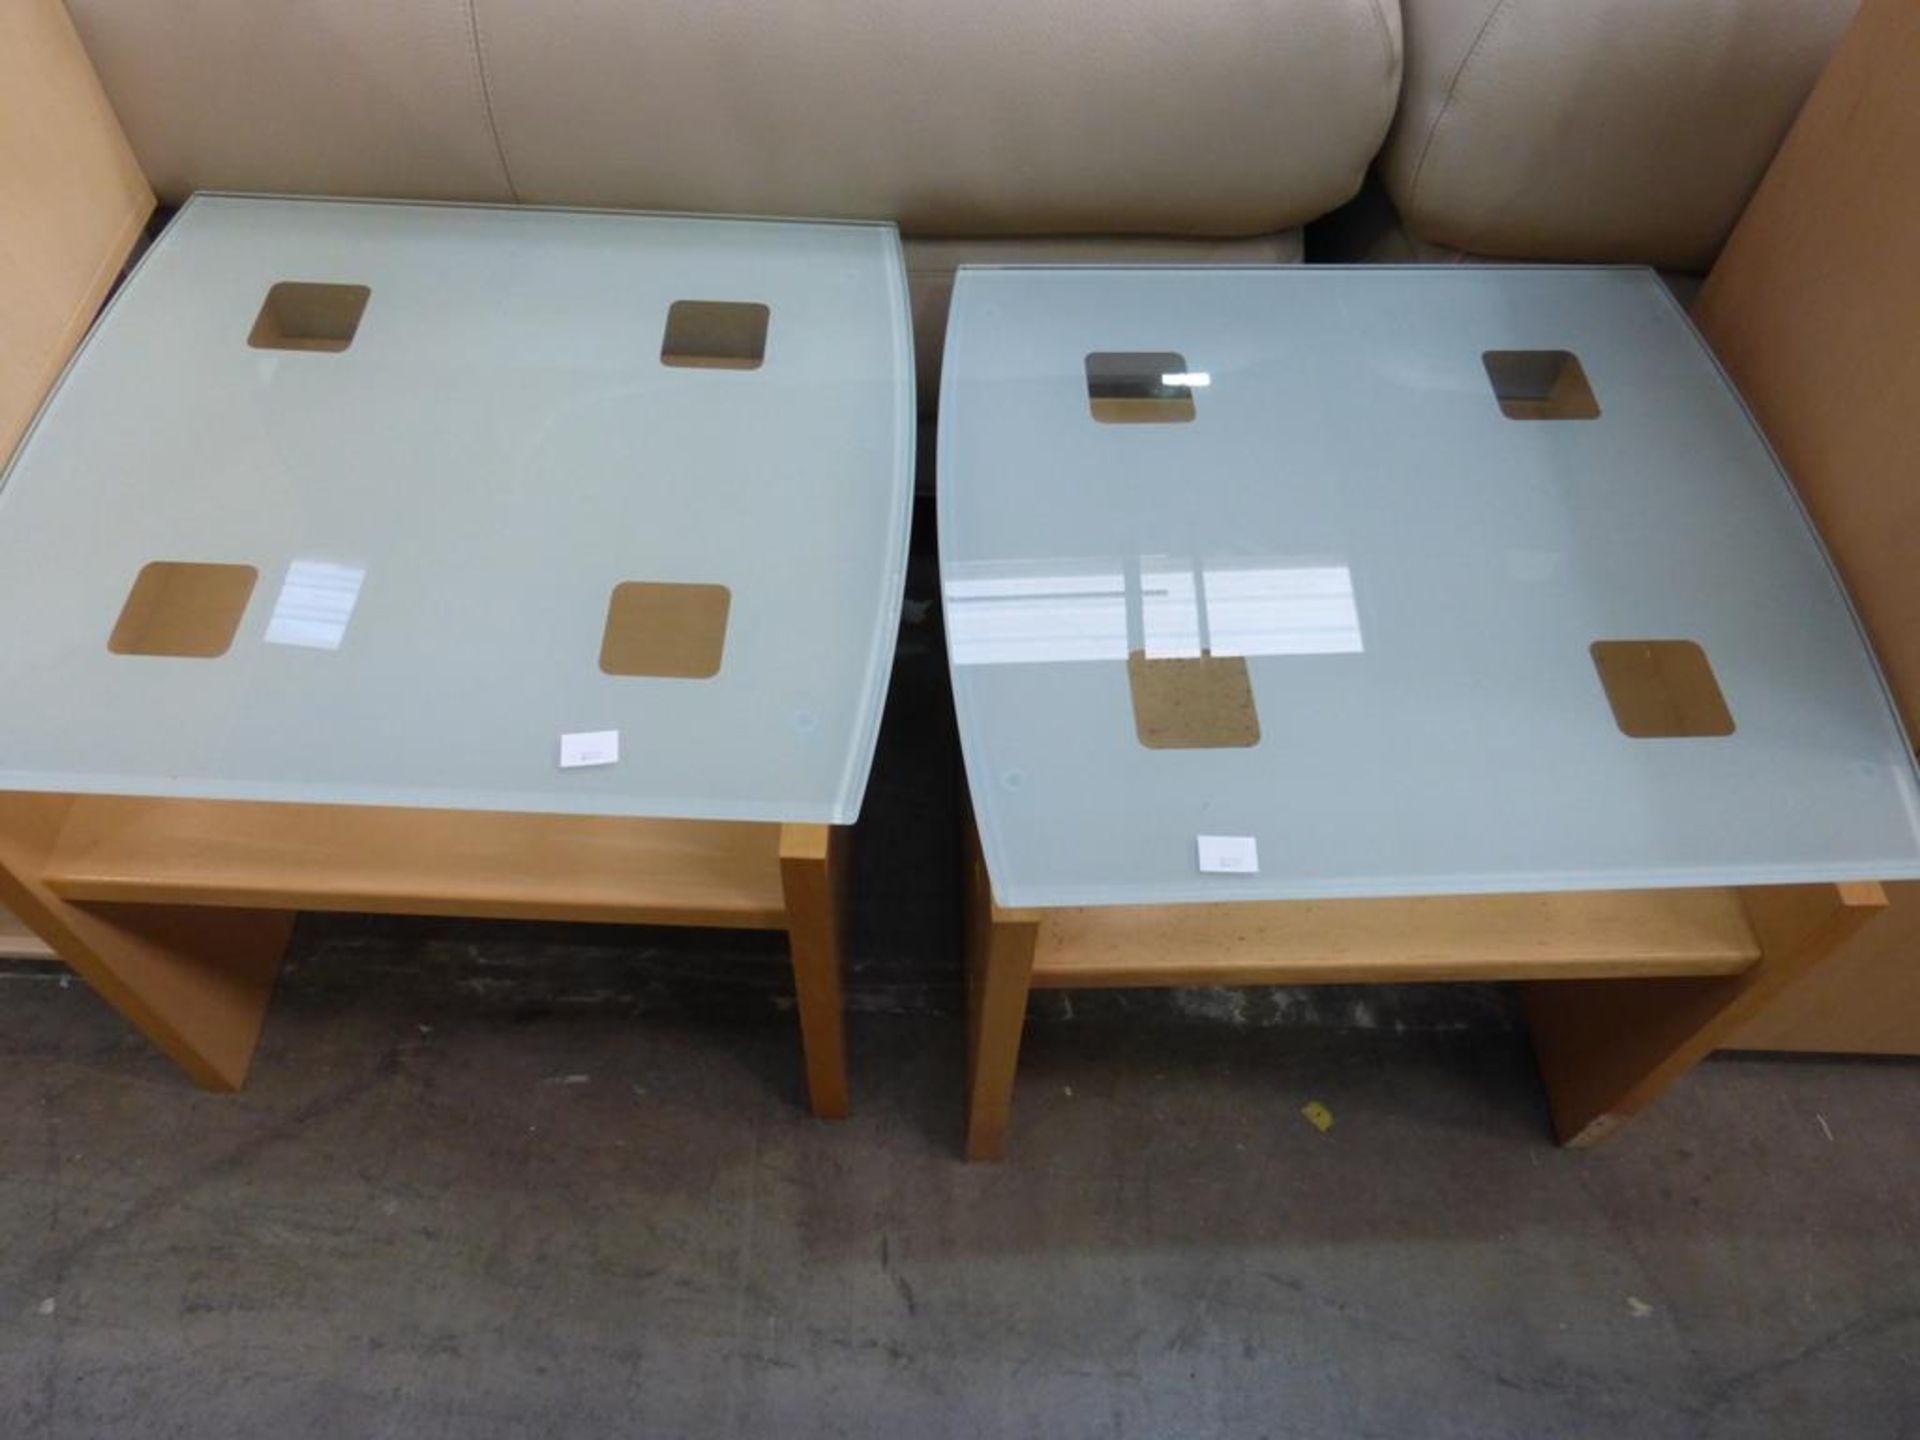 A Pair of Modern Lightwood Effect Bedside or Lamp Tables with Frosted Glass Top 52cm (est £30-£50)